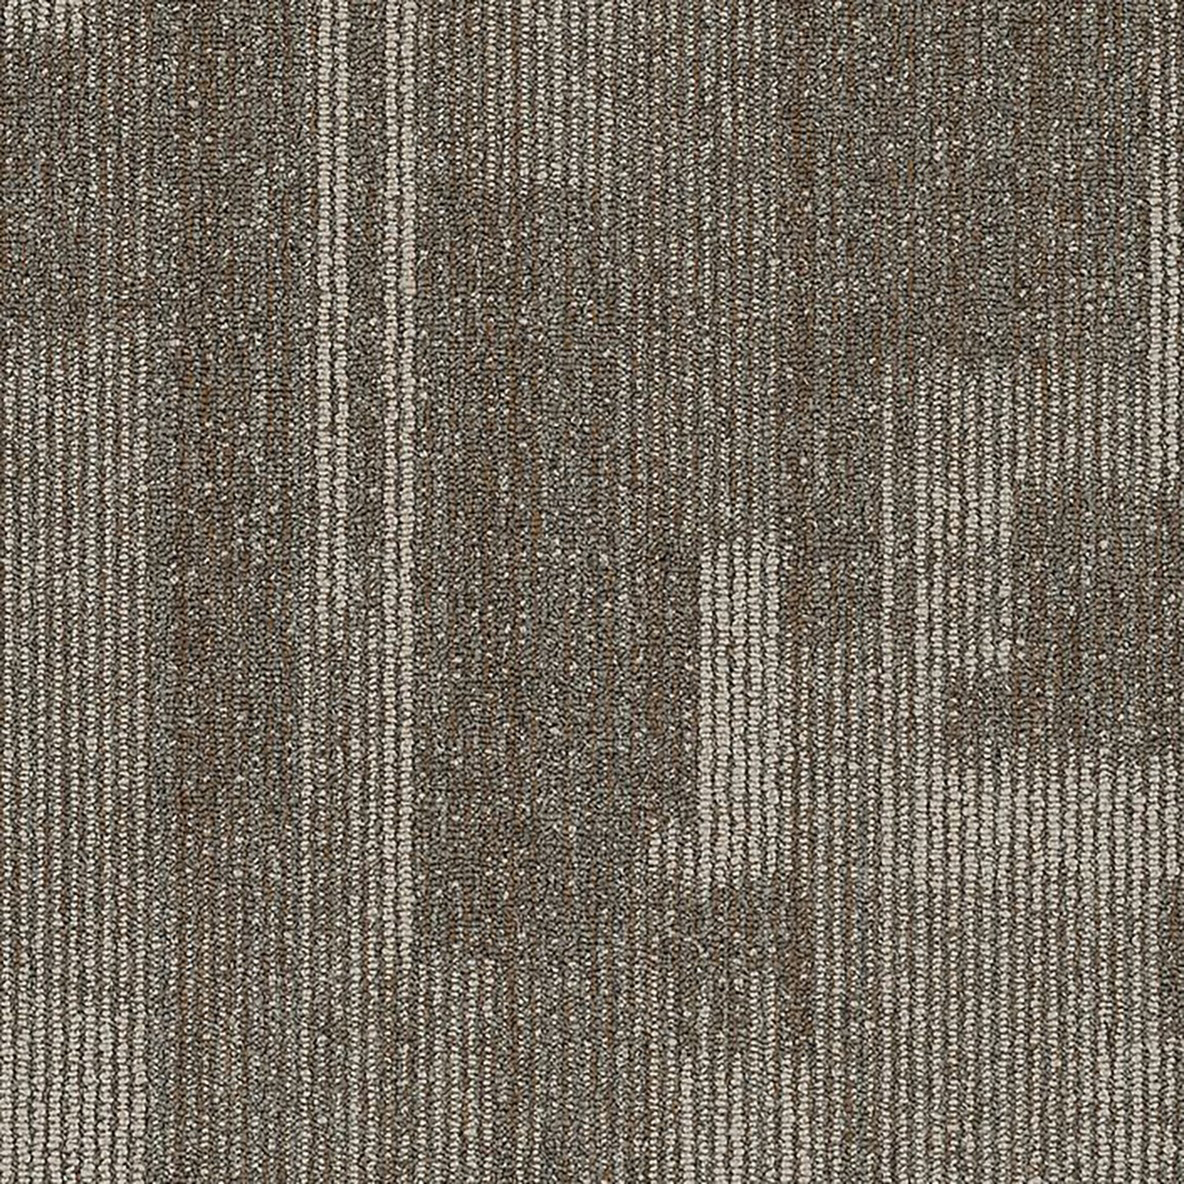 Point of View Commercial Carpet Plank .27 Inch x 18x36 Inches 10 per Carton Keen color close up